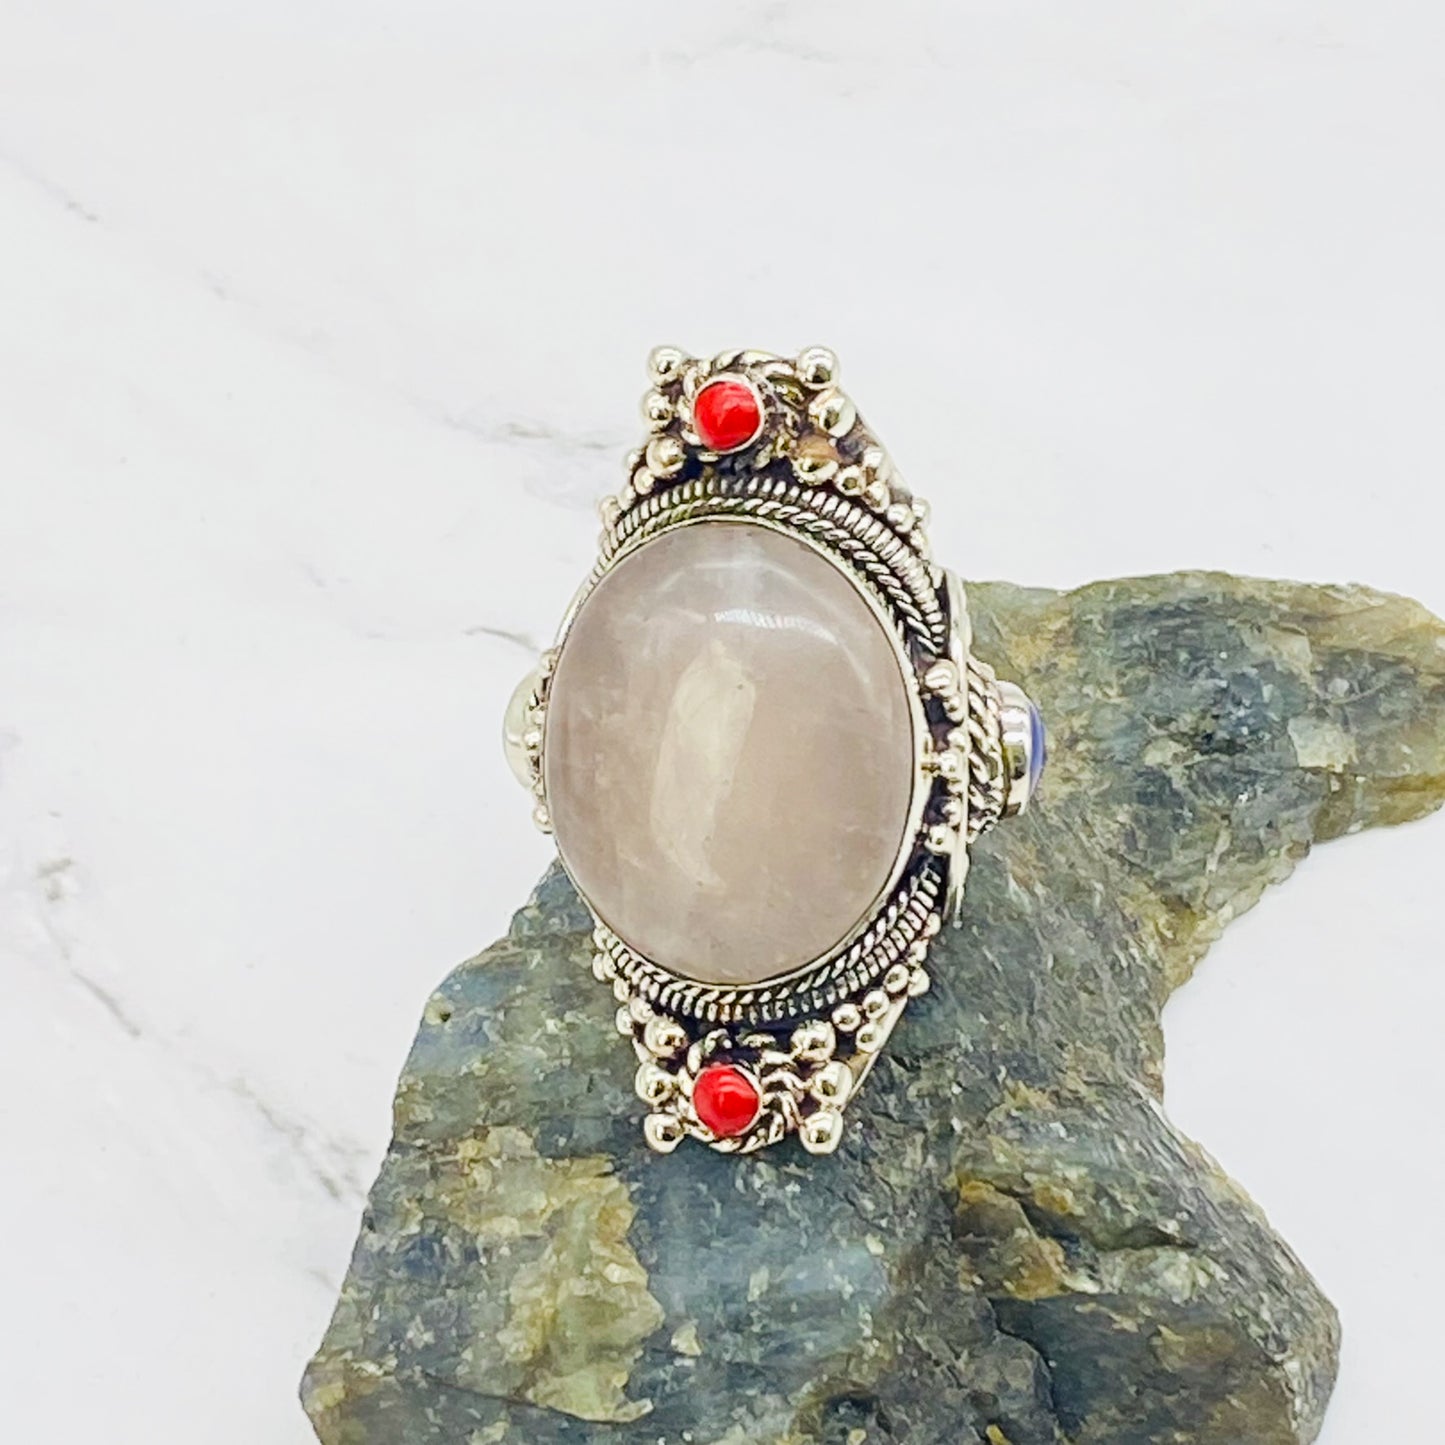 Stone silver rings, natural stone rings, handmade silver stone rings, culture fusion, Tibetan jewelry, unisex jewelry, bohemian jewelry